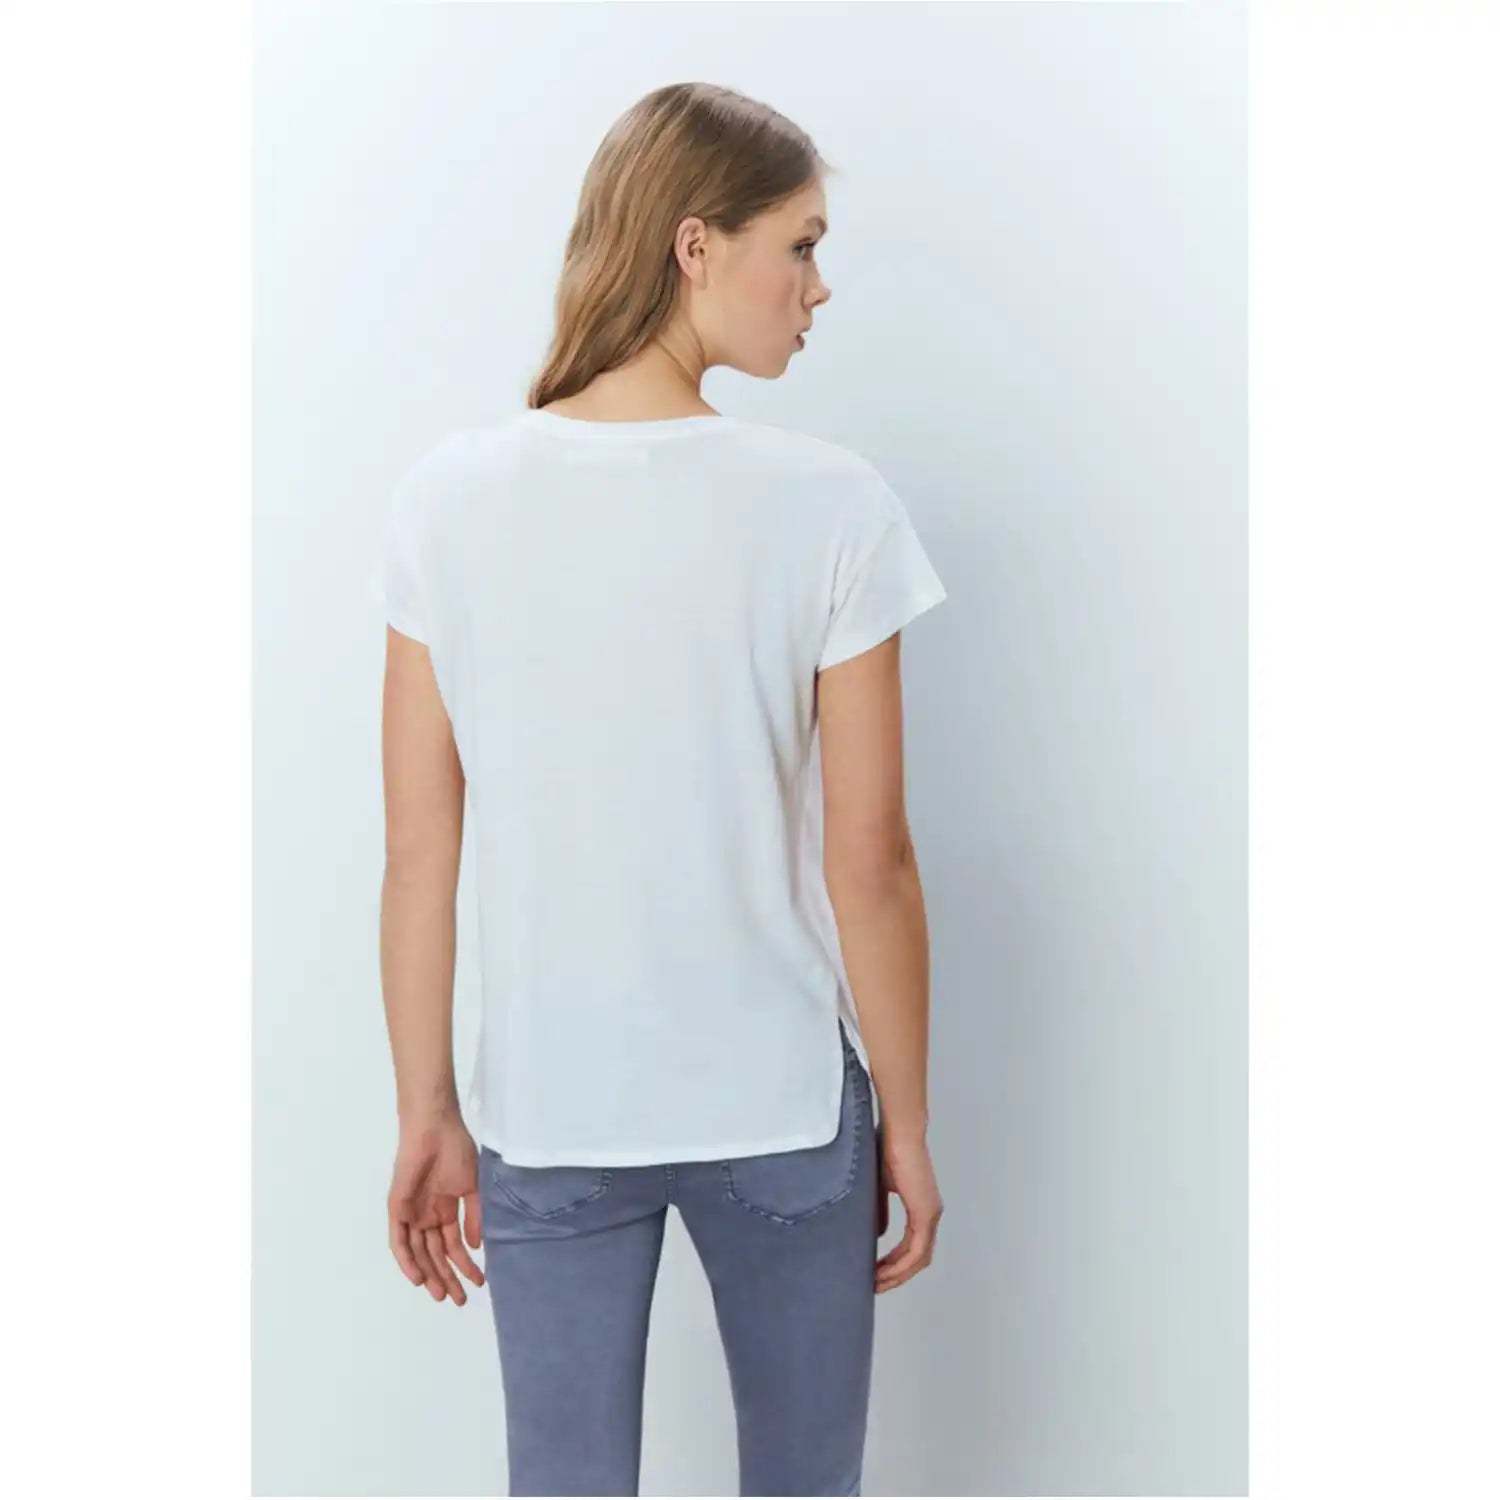 Sfera Sequined T-Shirt - White 4 Shaws Department Stores